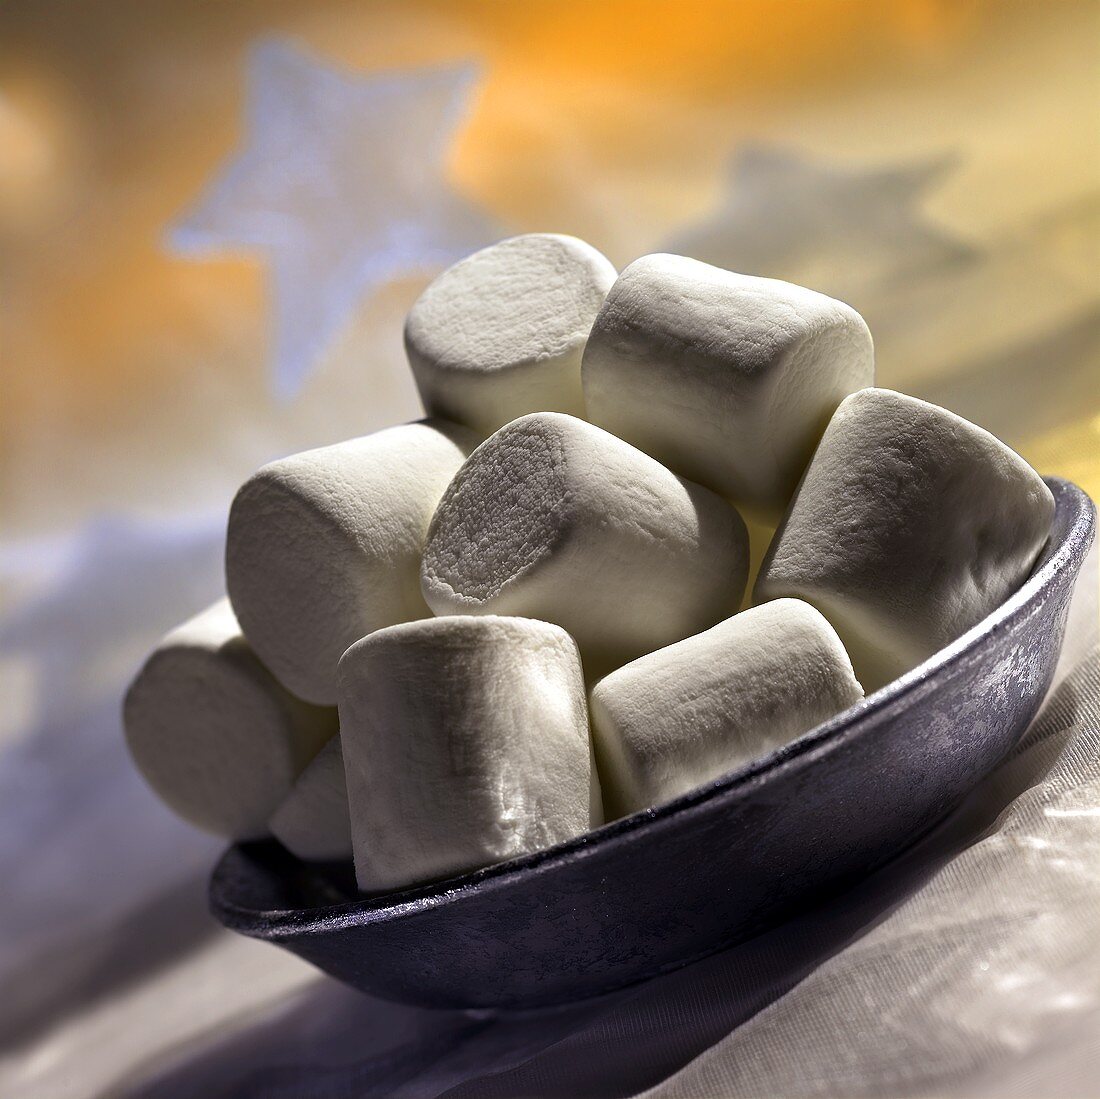 A Bowl of Marshmallows